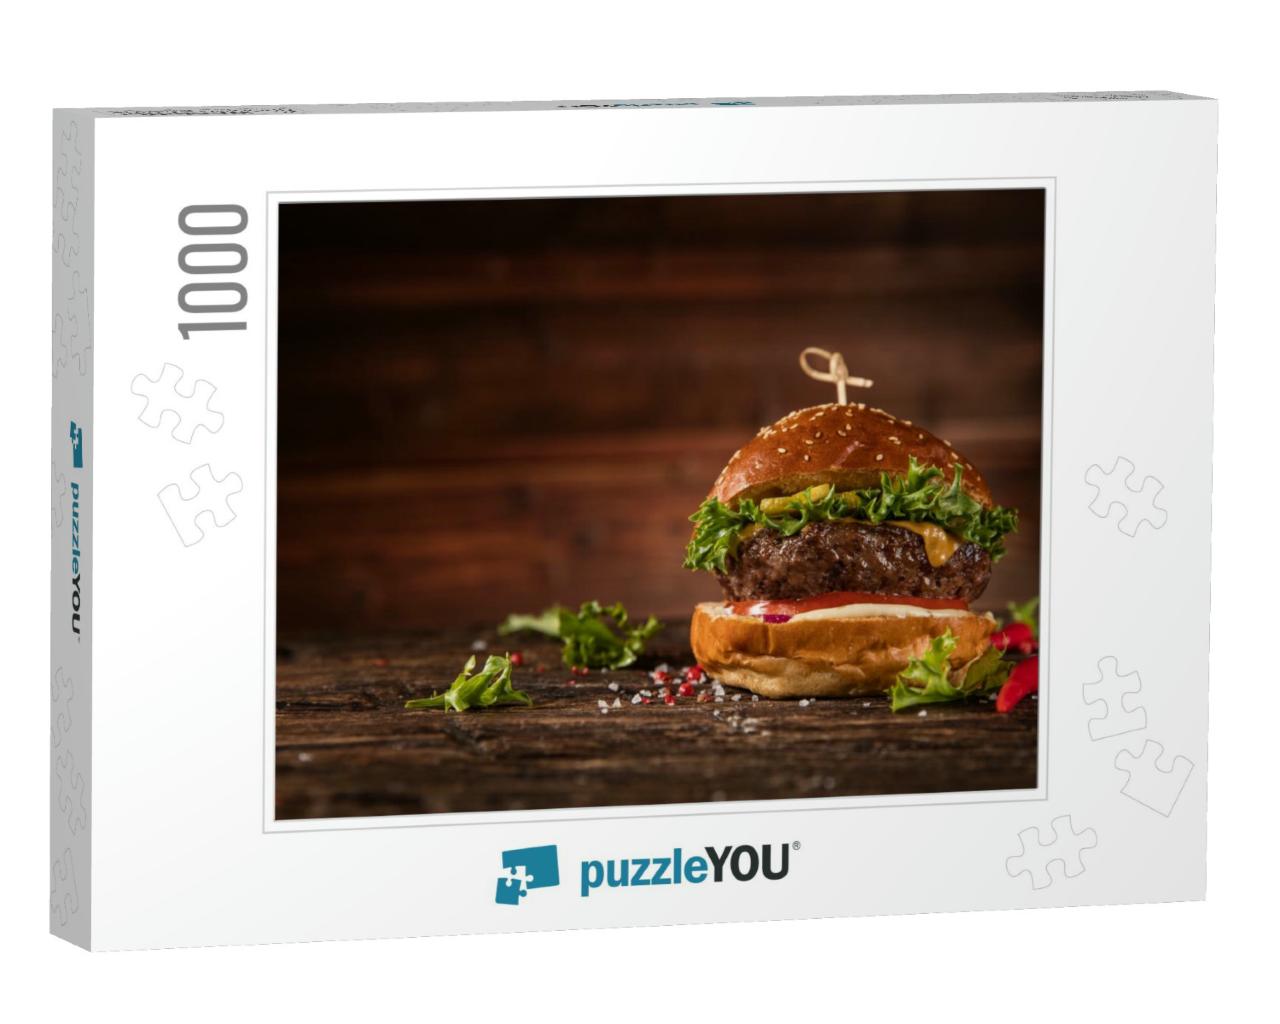 Delicious Hamburger, Served on Wood. Free Space for Text... Jigsaw Puzzle with 1000 pieces